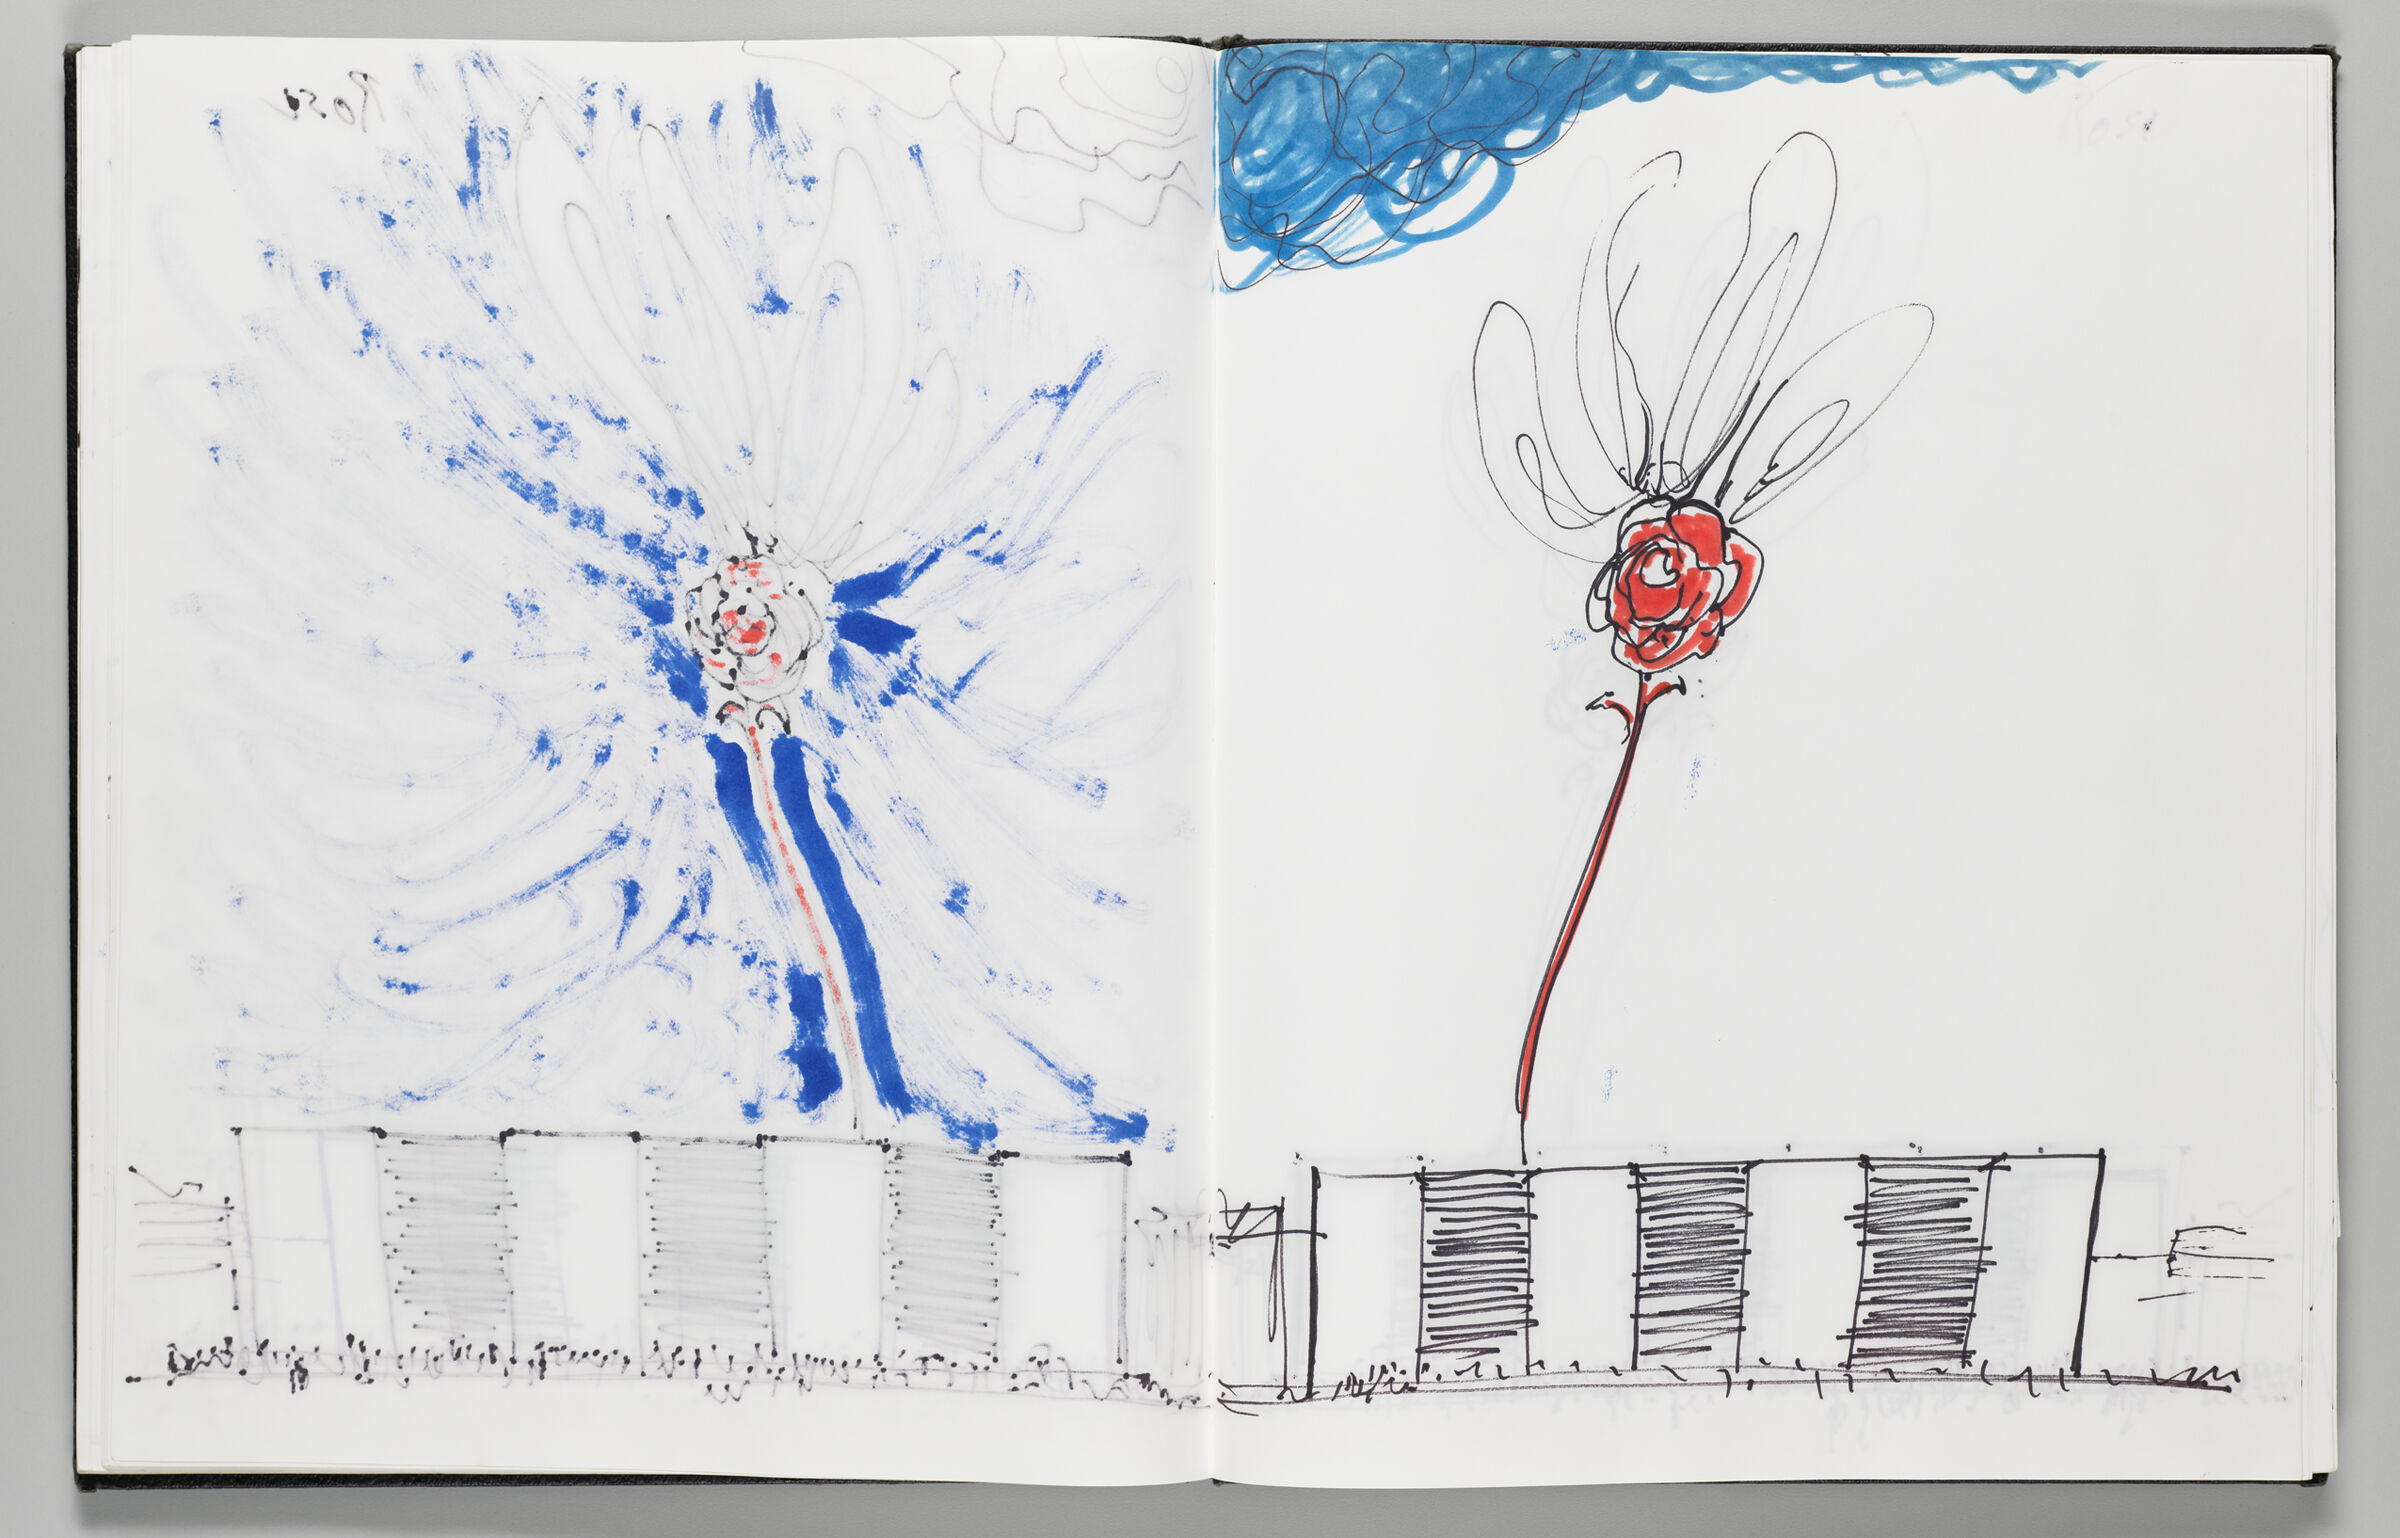 Untitled (Bleed-Through Of Previous Page, Left Page); Untitled (Rose Inflatable, Right Page)